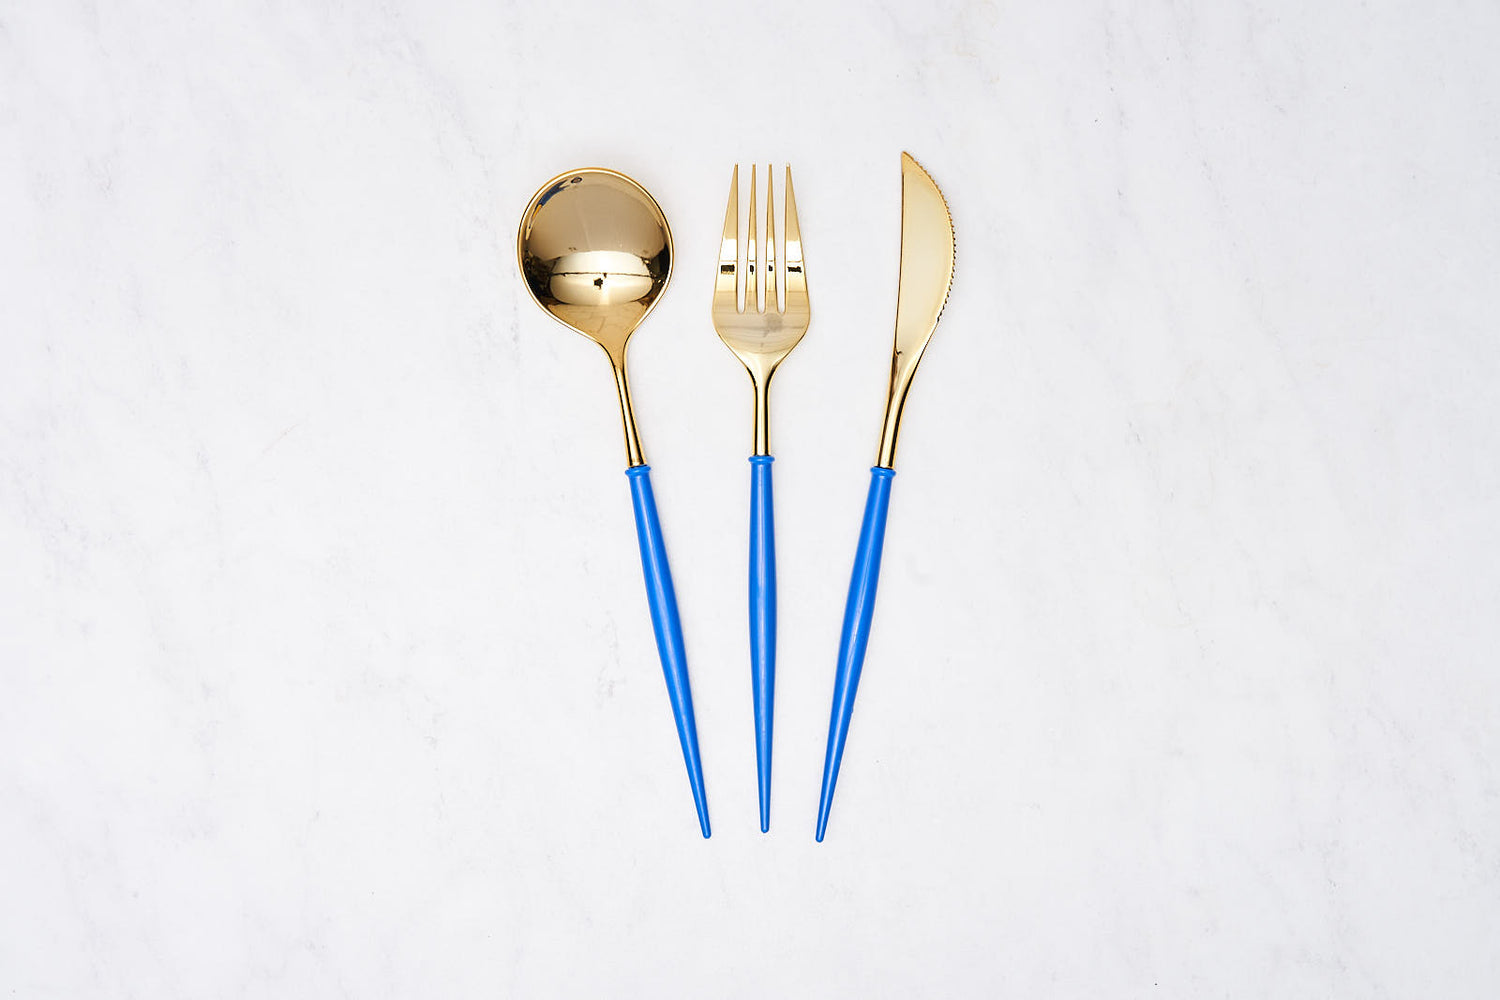 Bella Plastic Cutlery in Gold and Blue by Sophistiplate, featuring a sleek modern design with a spoon, fork, and knife, ideal for elevating any event setting.